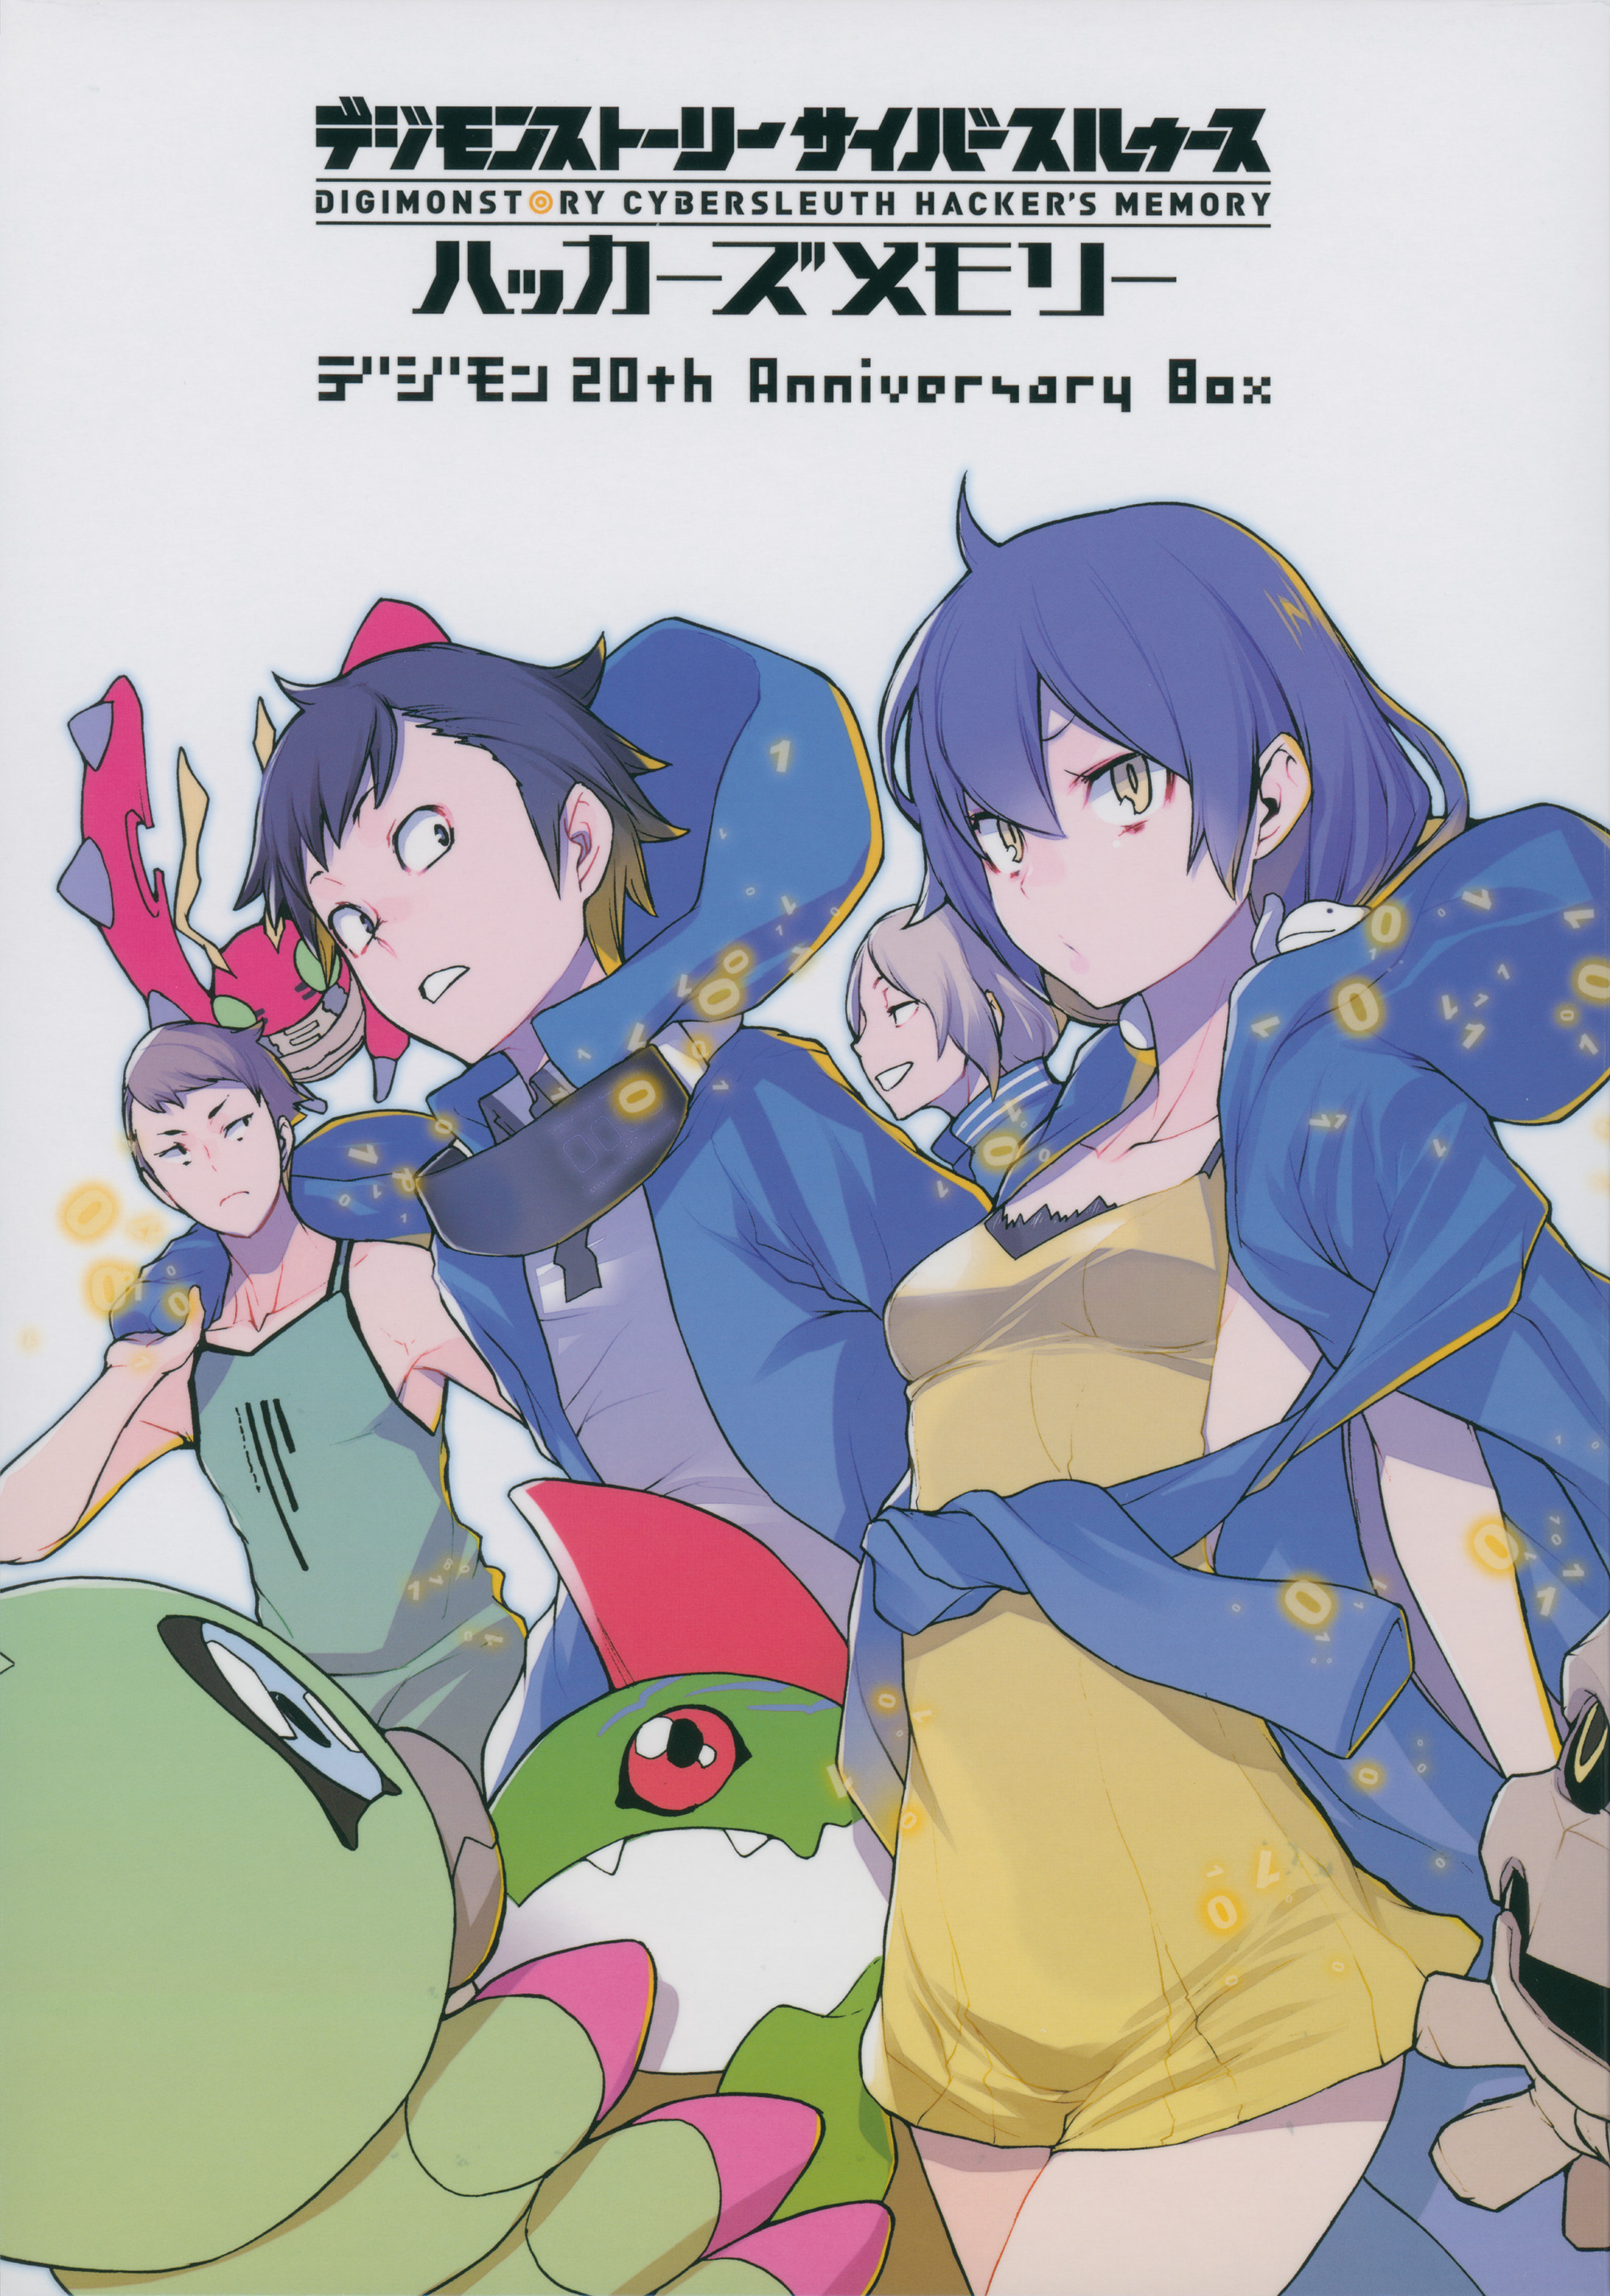 Digimon Images: Digimon Story Cyber Sleuth Hackers Memory Under Zero